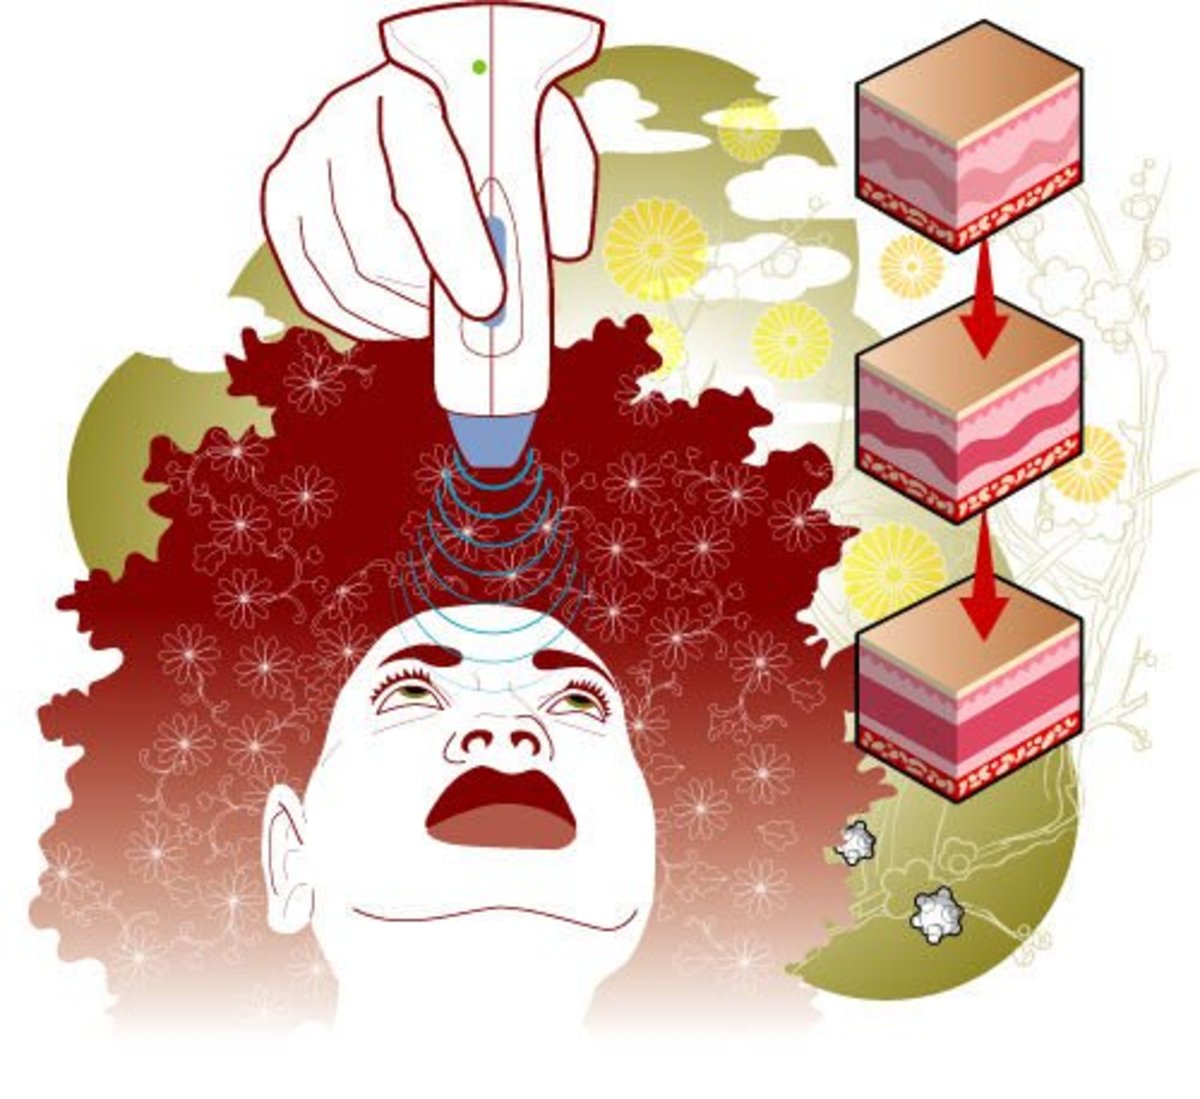 Thermage by illos for TimeOut NY, the Spa issue 